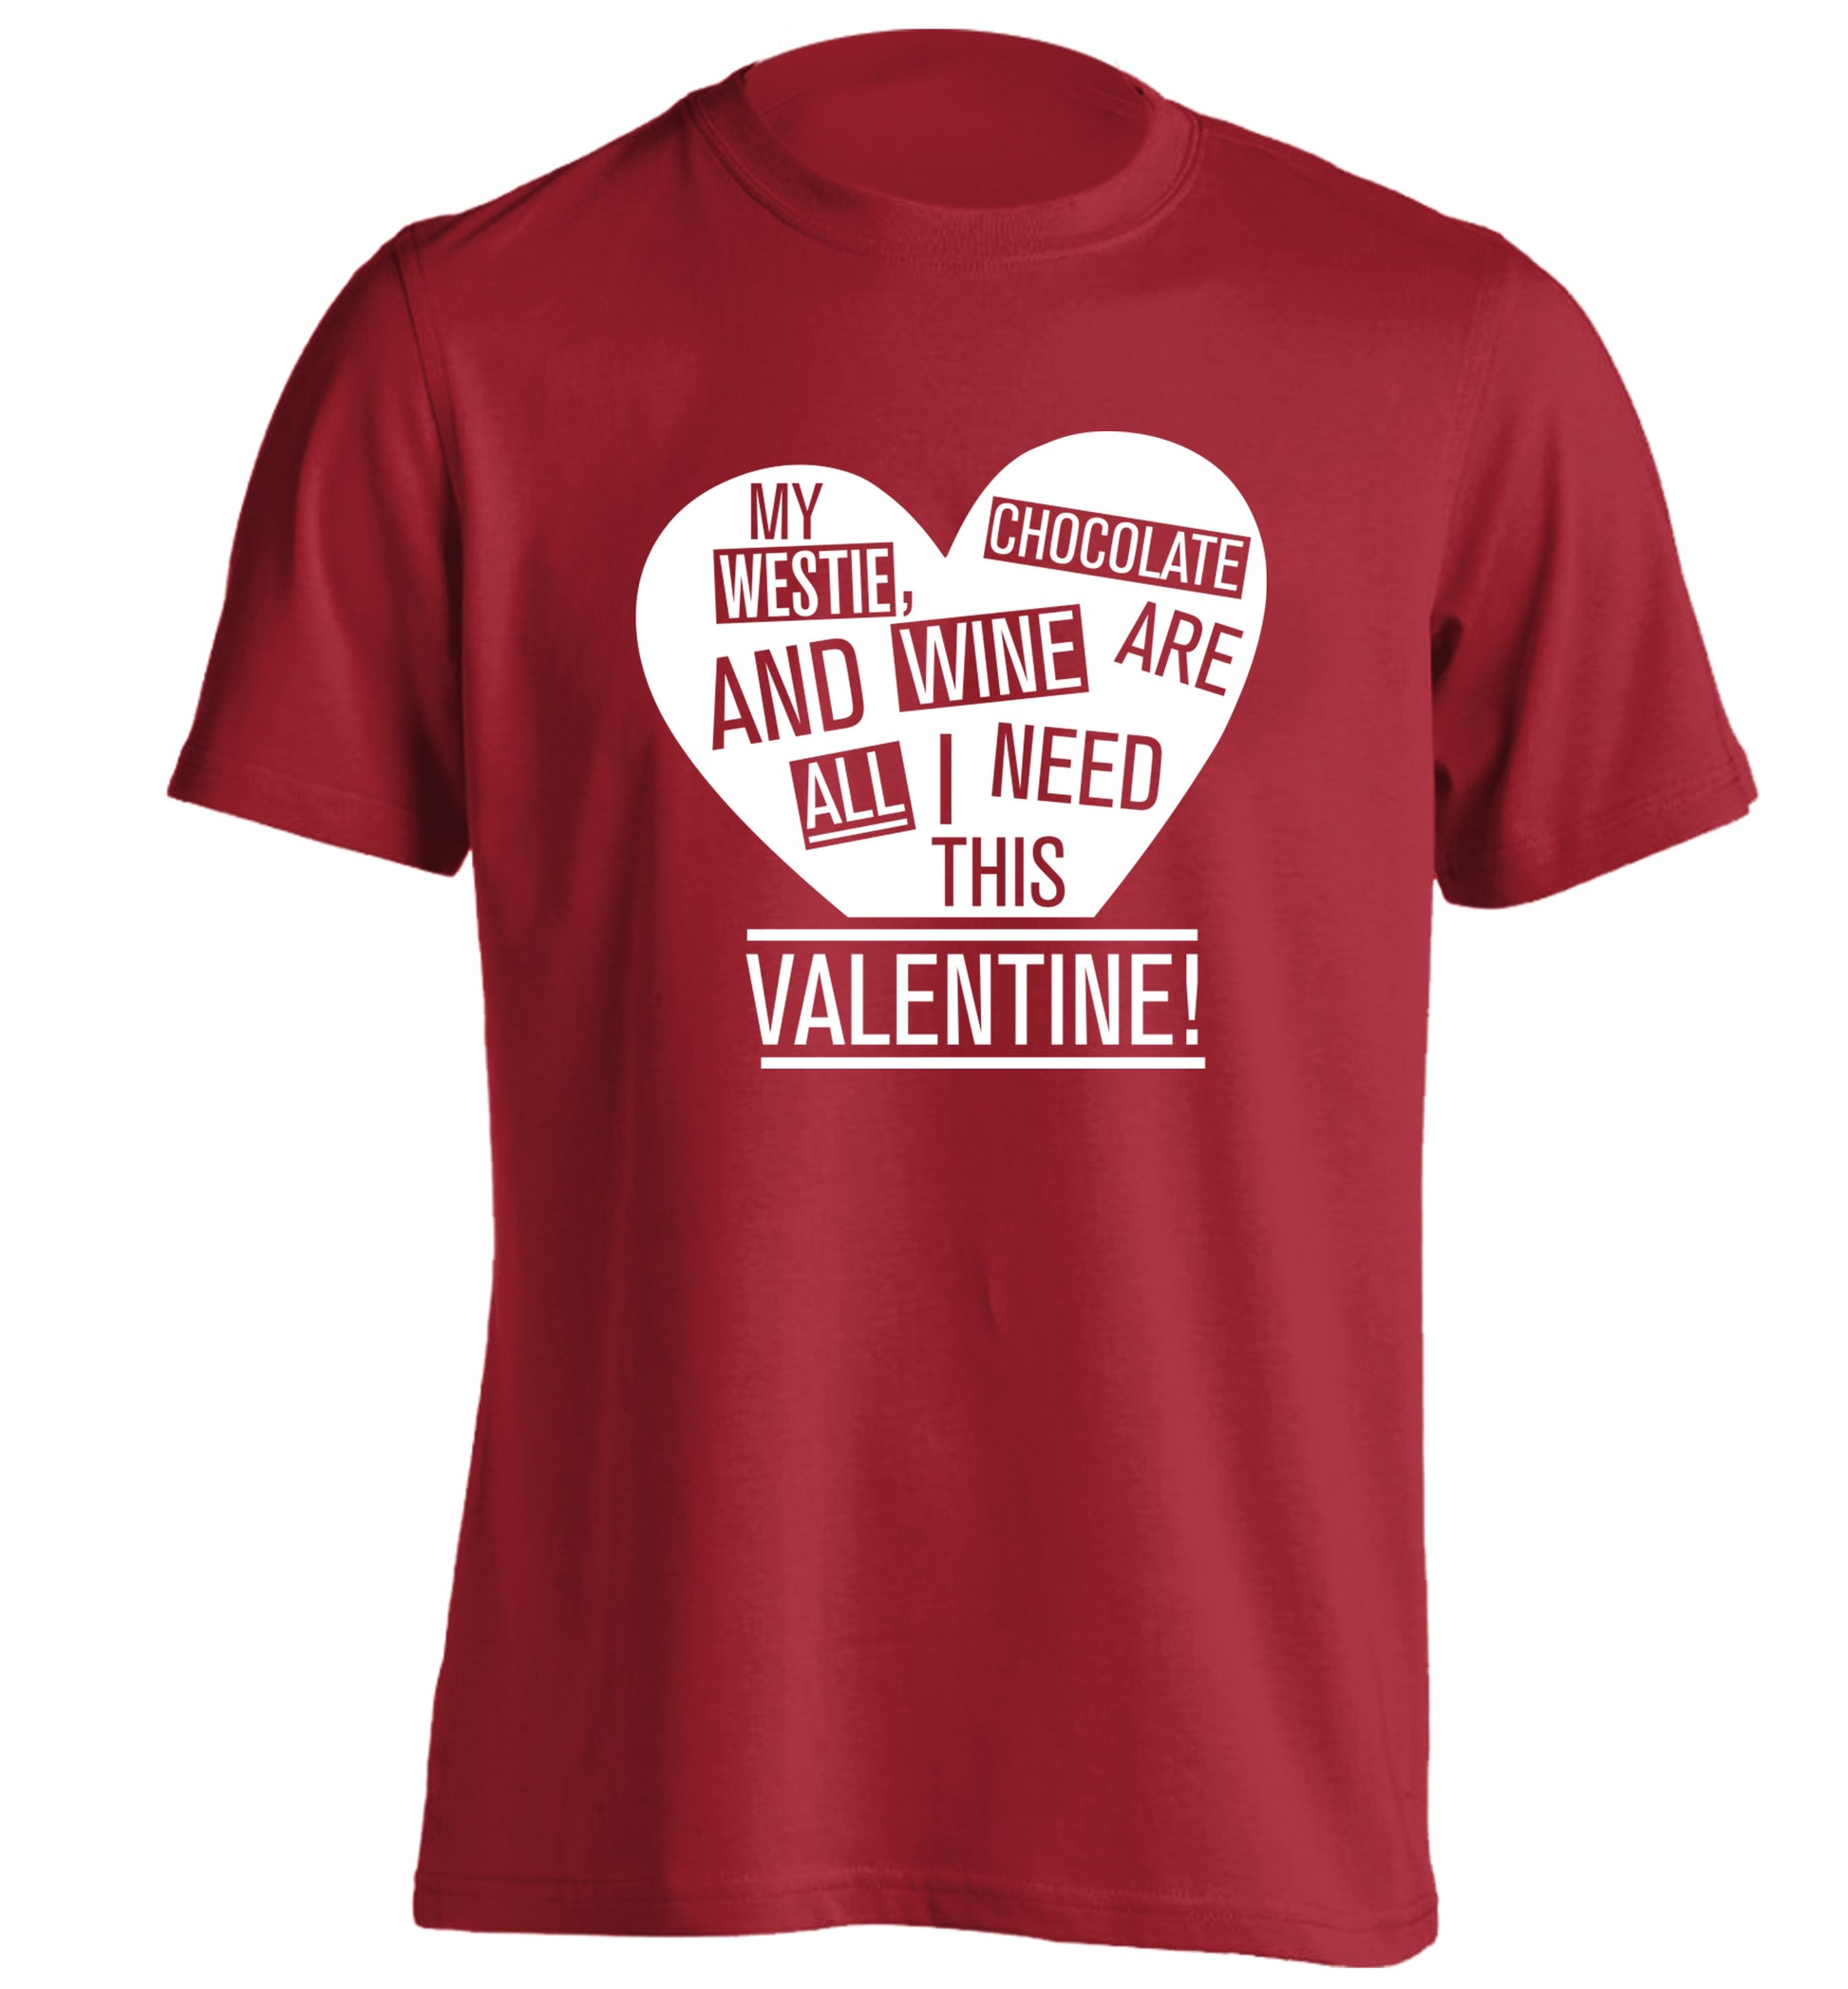 My westie, chocolate and wine are all I need this valentine! adults unisex red Tshirt 2XL